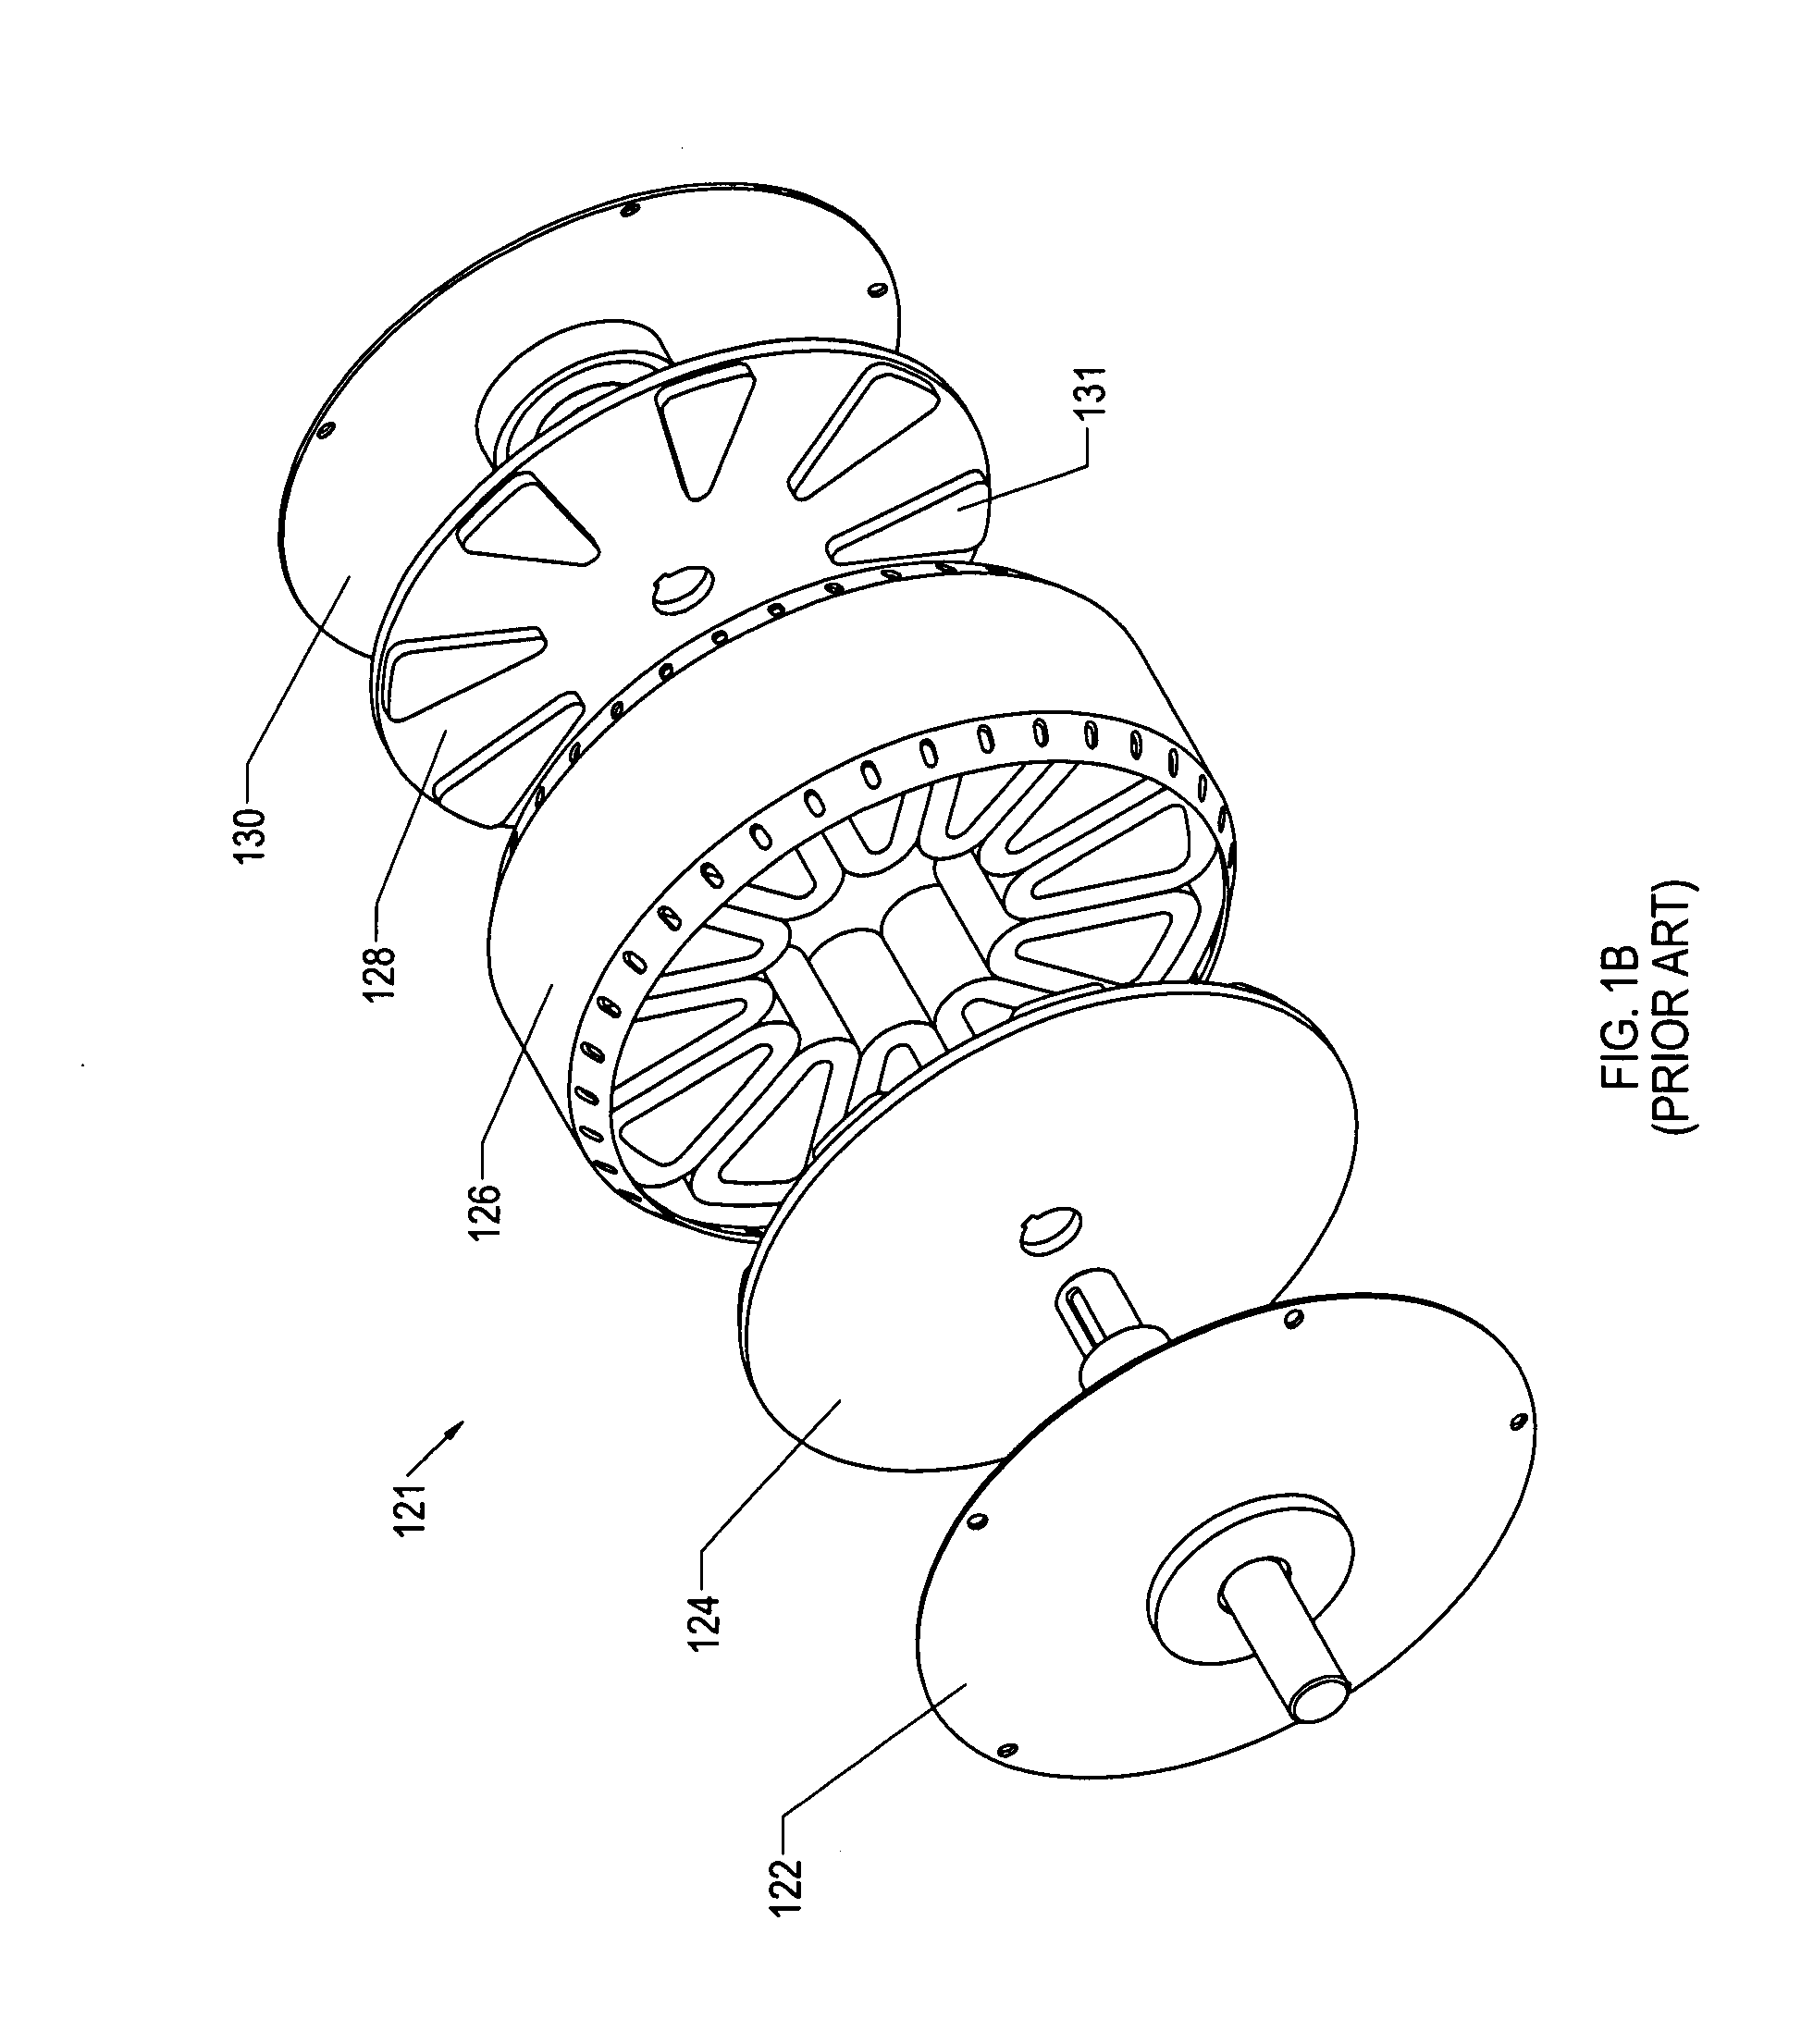 Field pole members and methods of forming same for electrodynamic machines